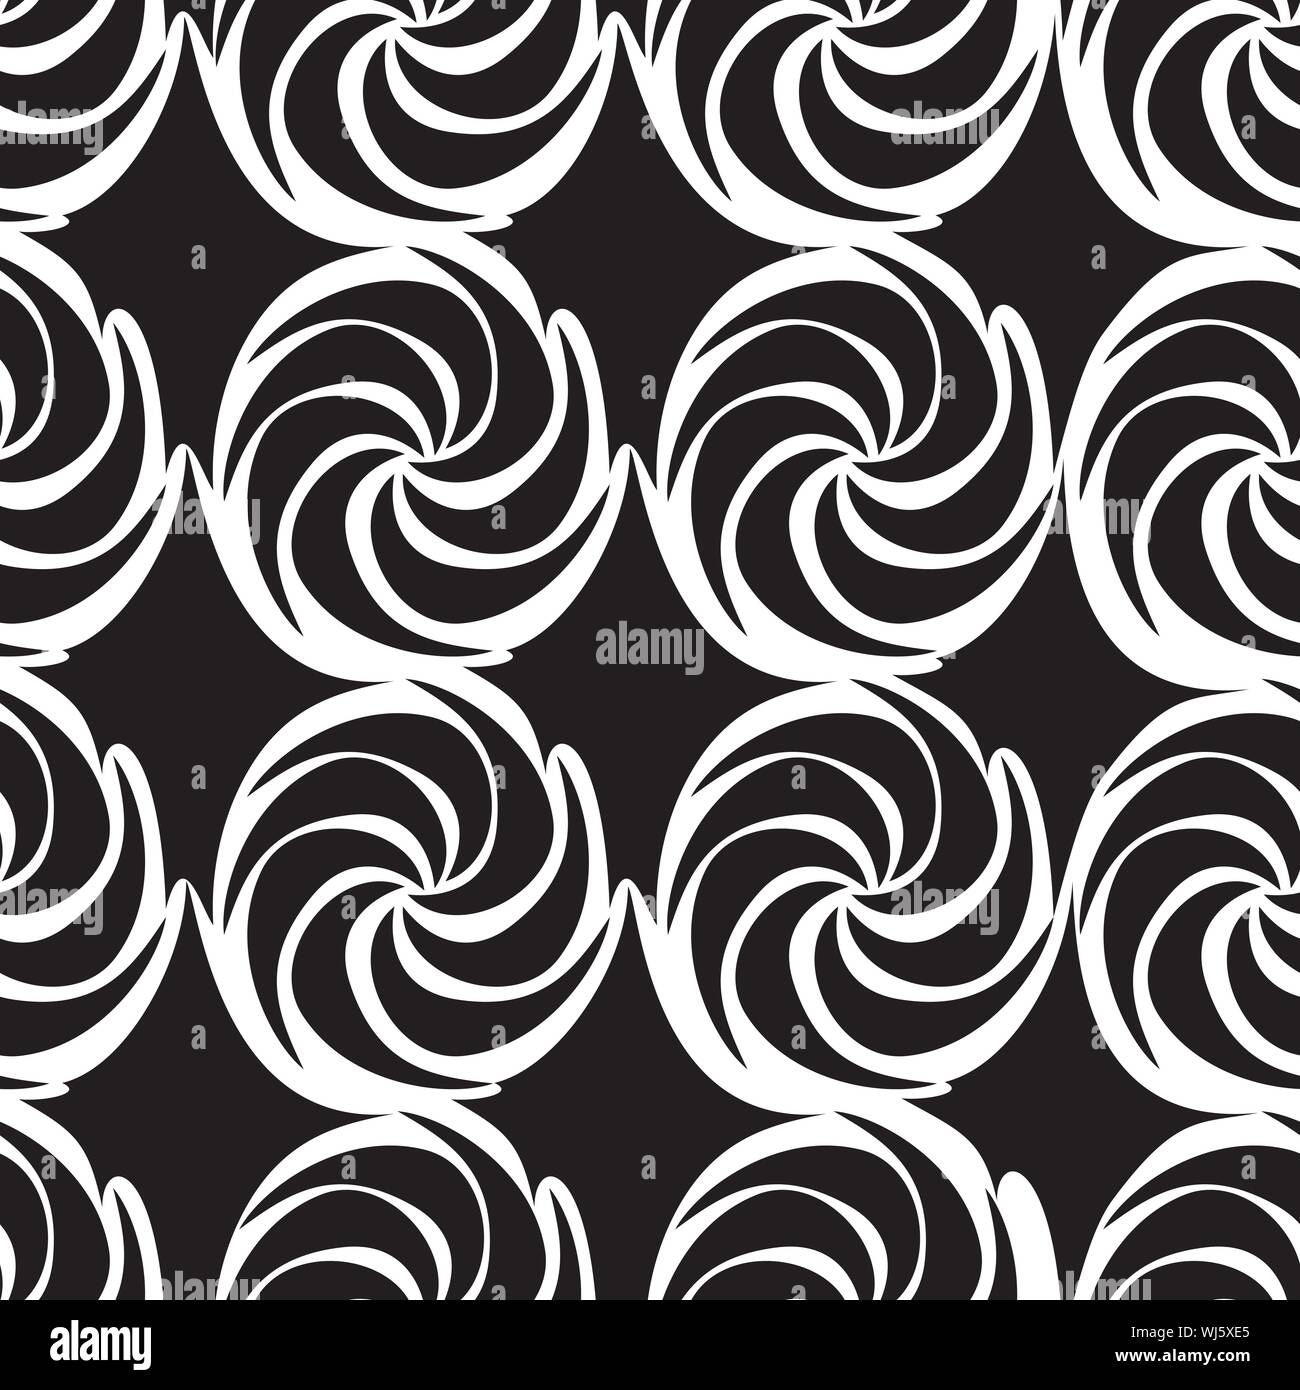 Vector monochrome decorative continuous background using wavy lines, curves and circles. Composition can be used as wallpaper. Stock Vector